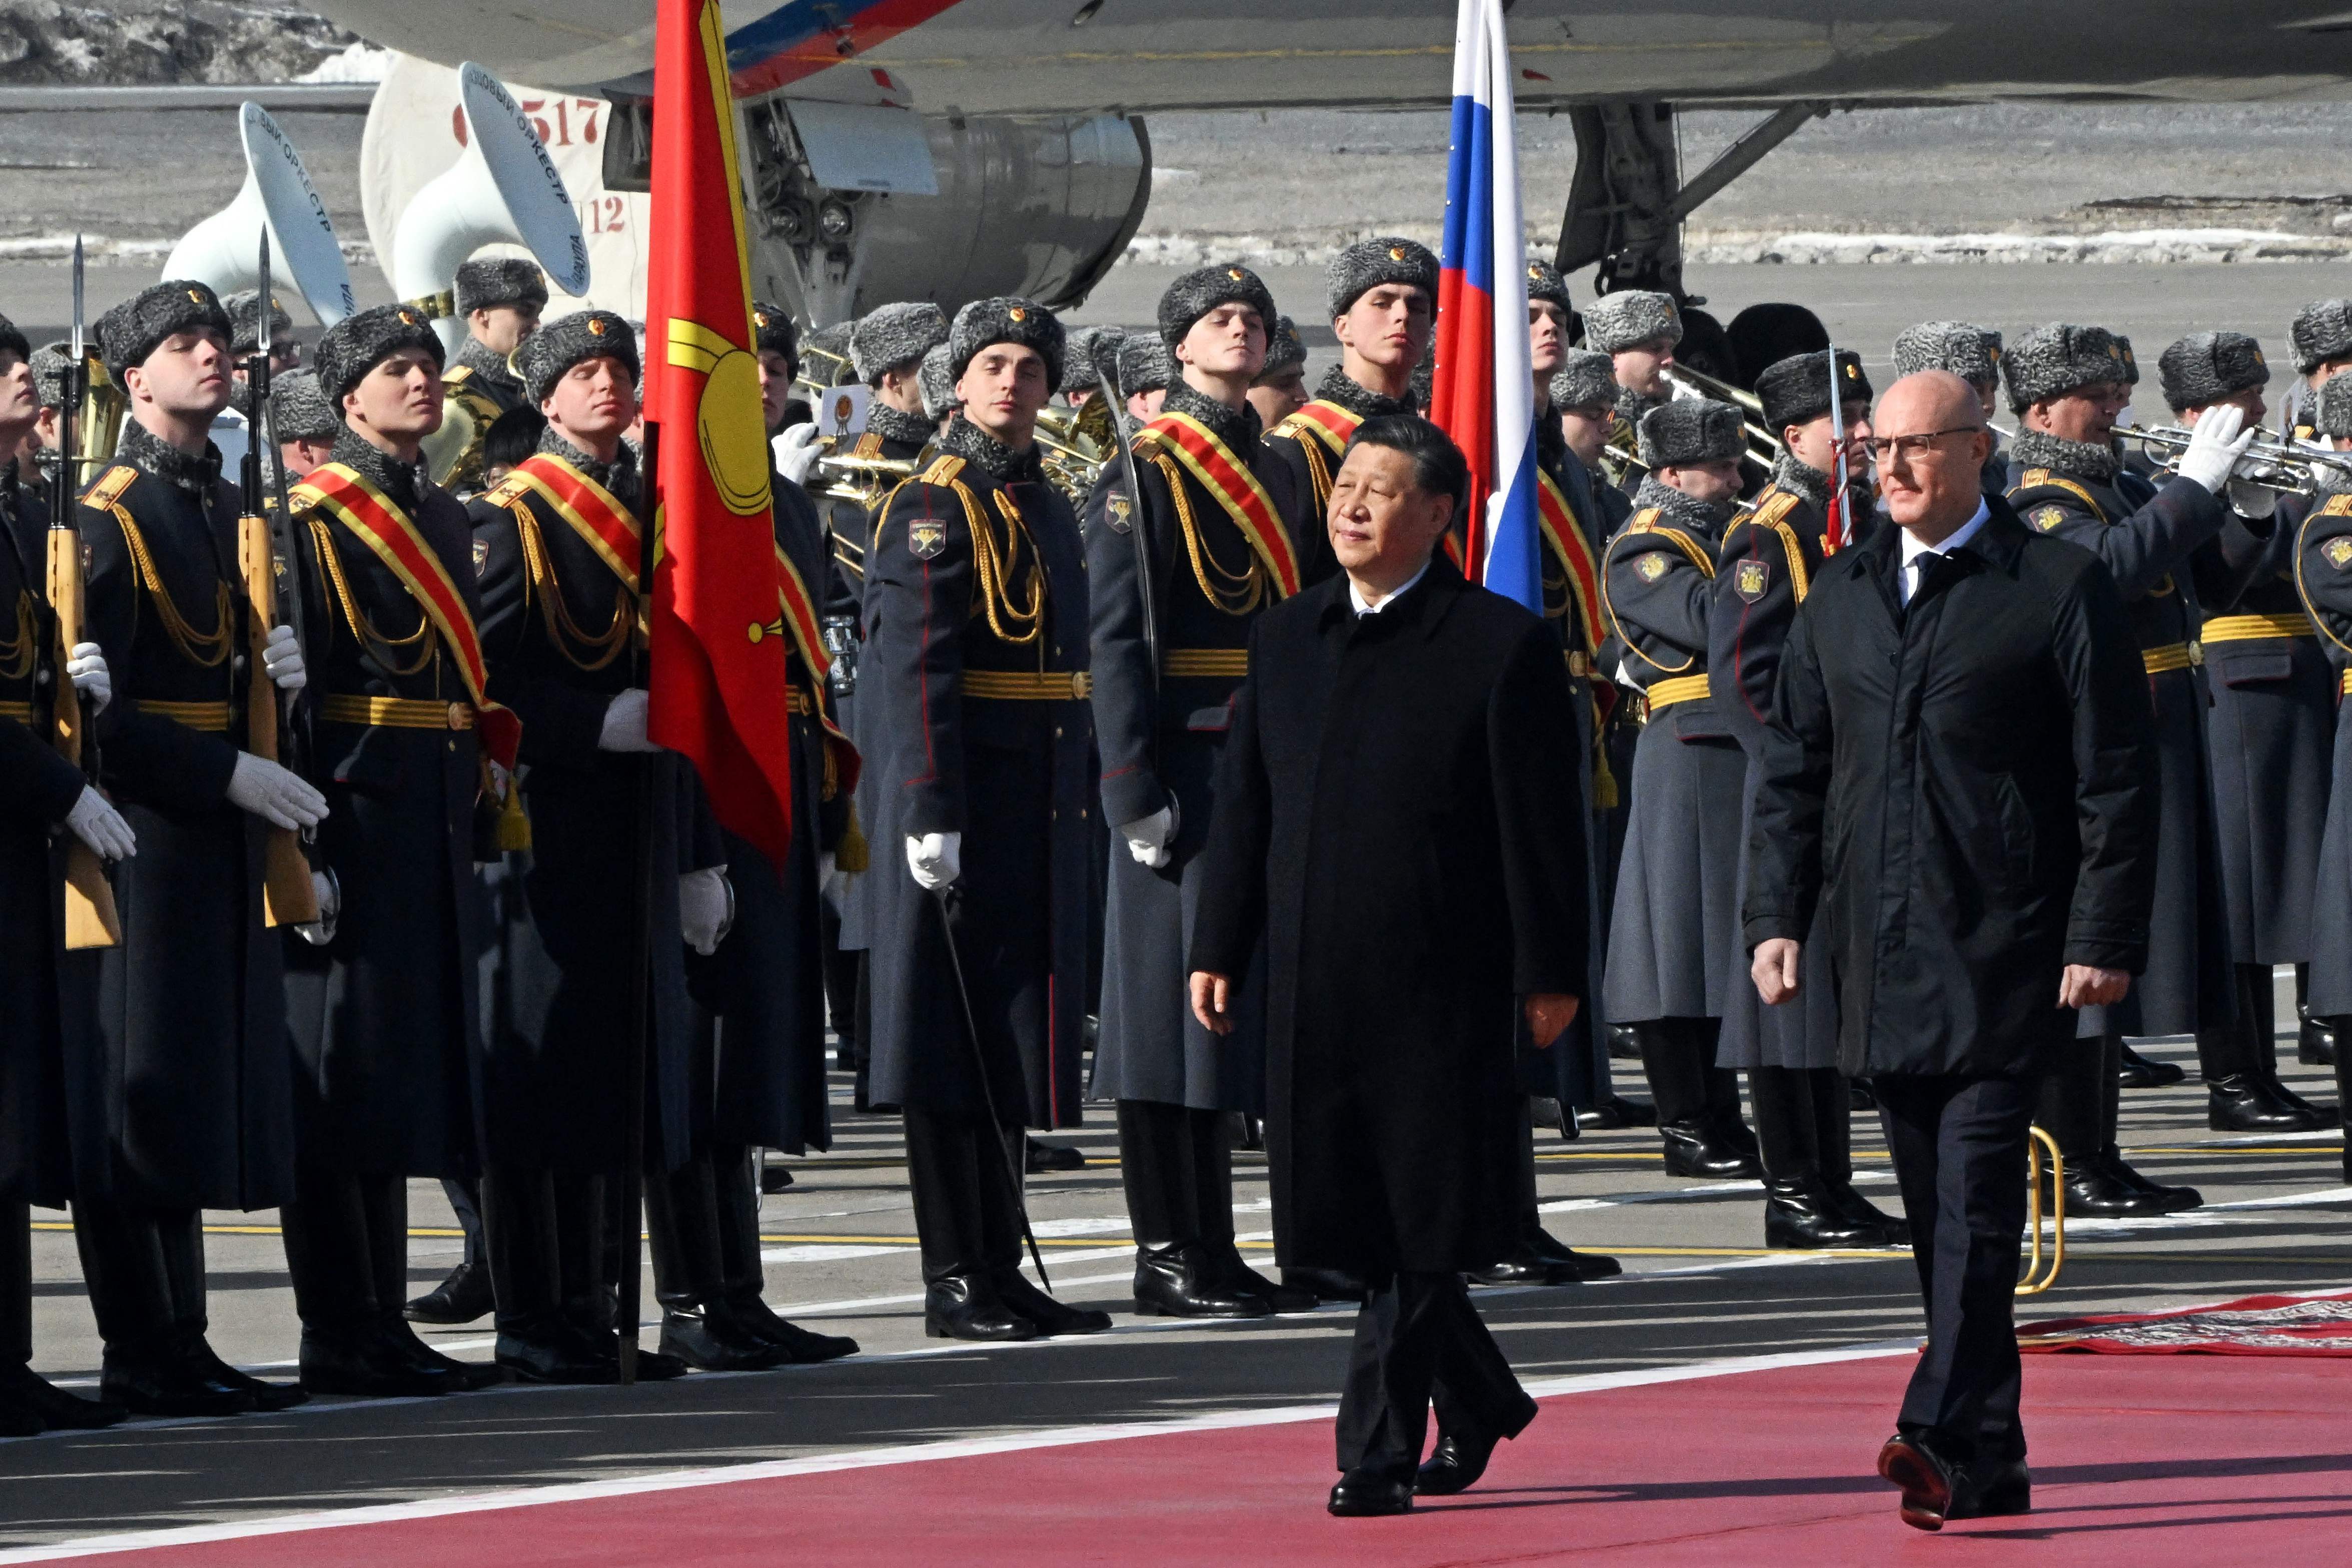 China's President Xi Jinping, accompanied by Russian Deputy Prime Minister Dmitry Chernyshenko, walks past honour guards during a welcoming ceremony at Moscow's Vnukovo airport